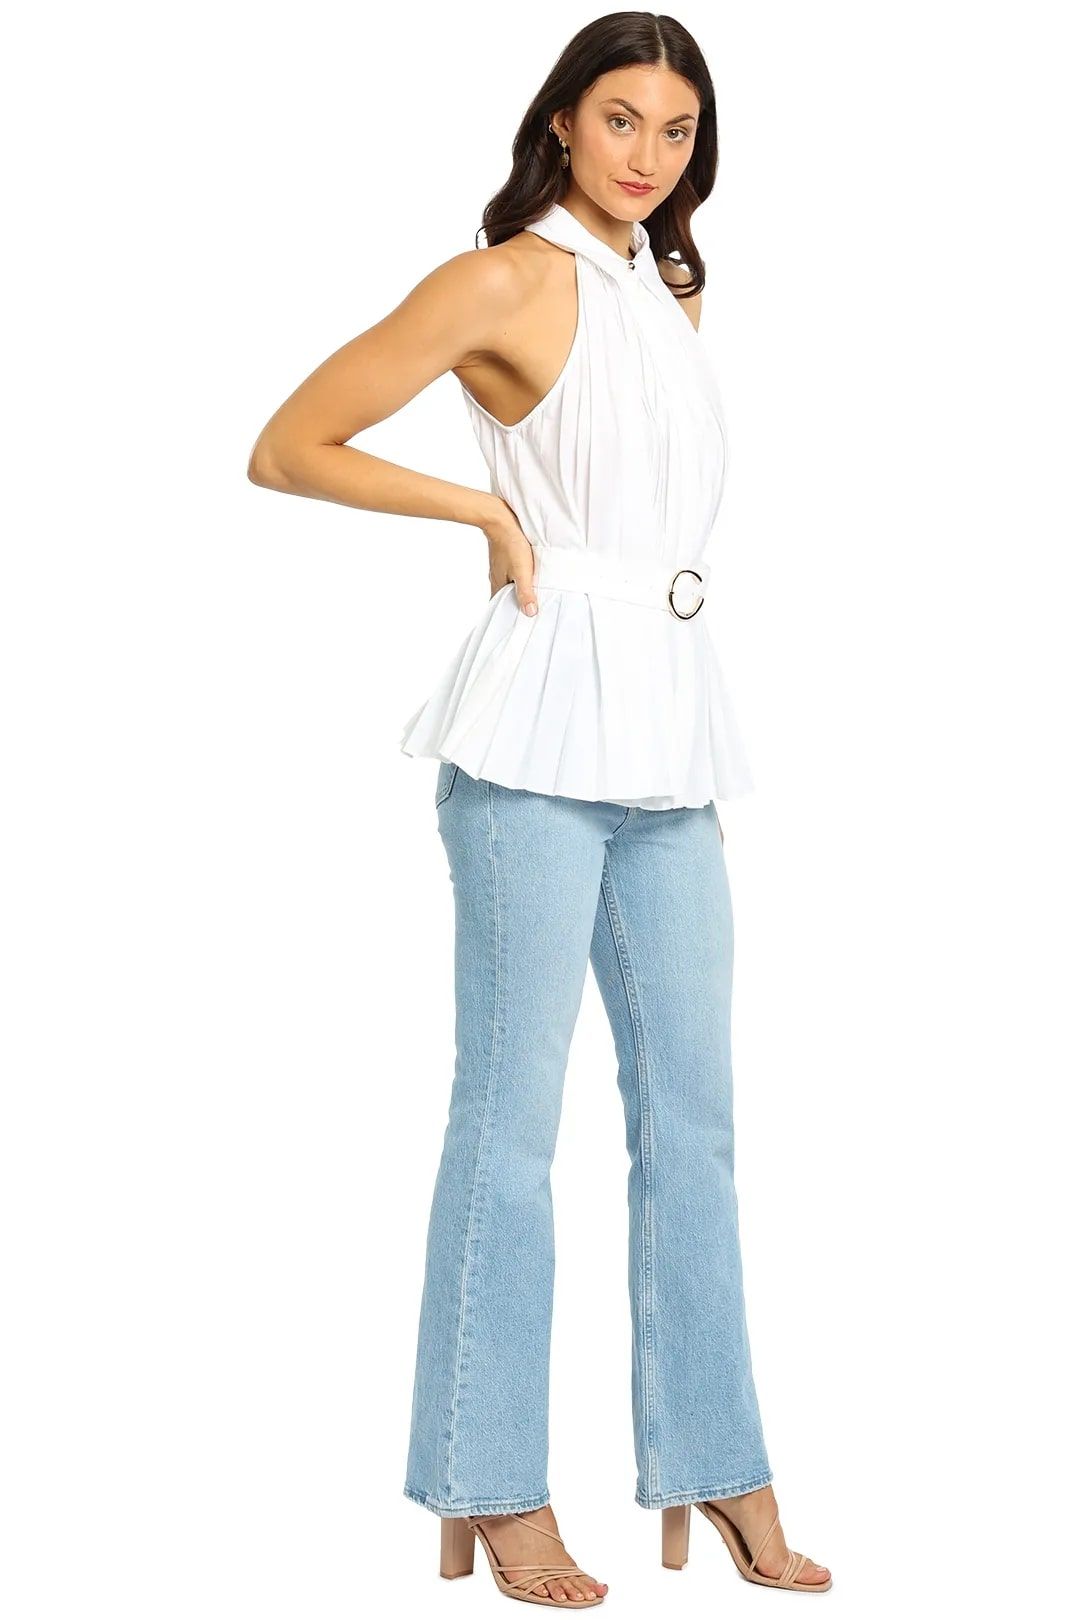 Rent Prospect top for spring fashion.